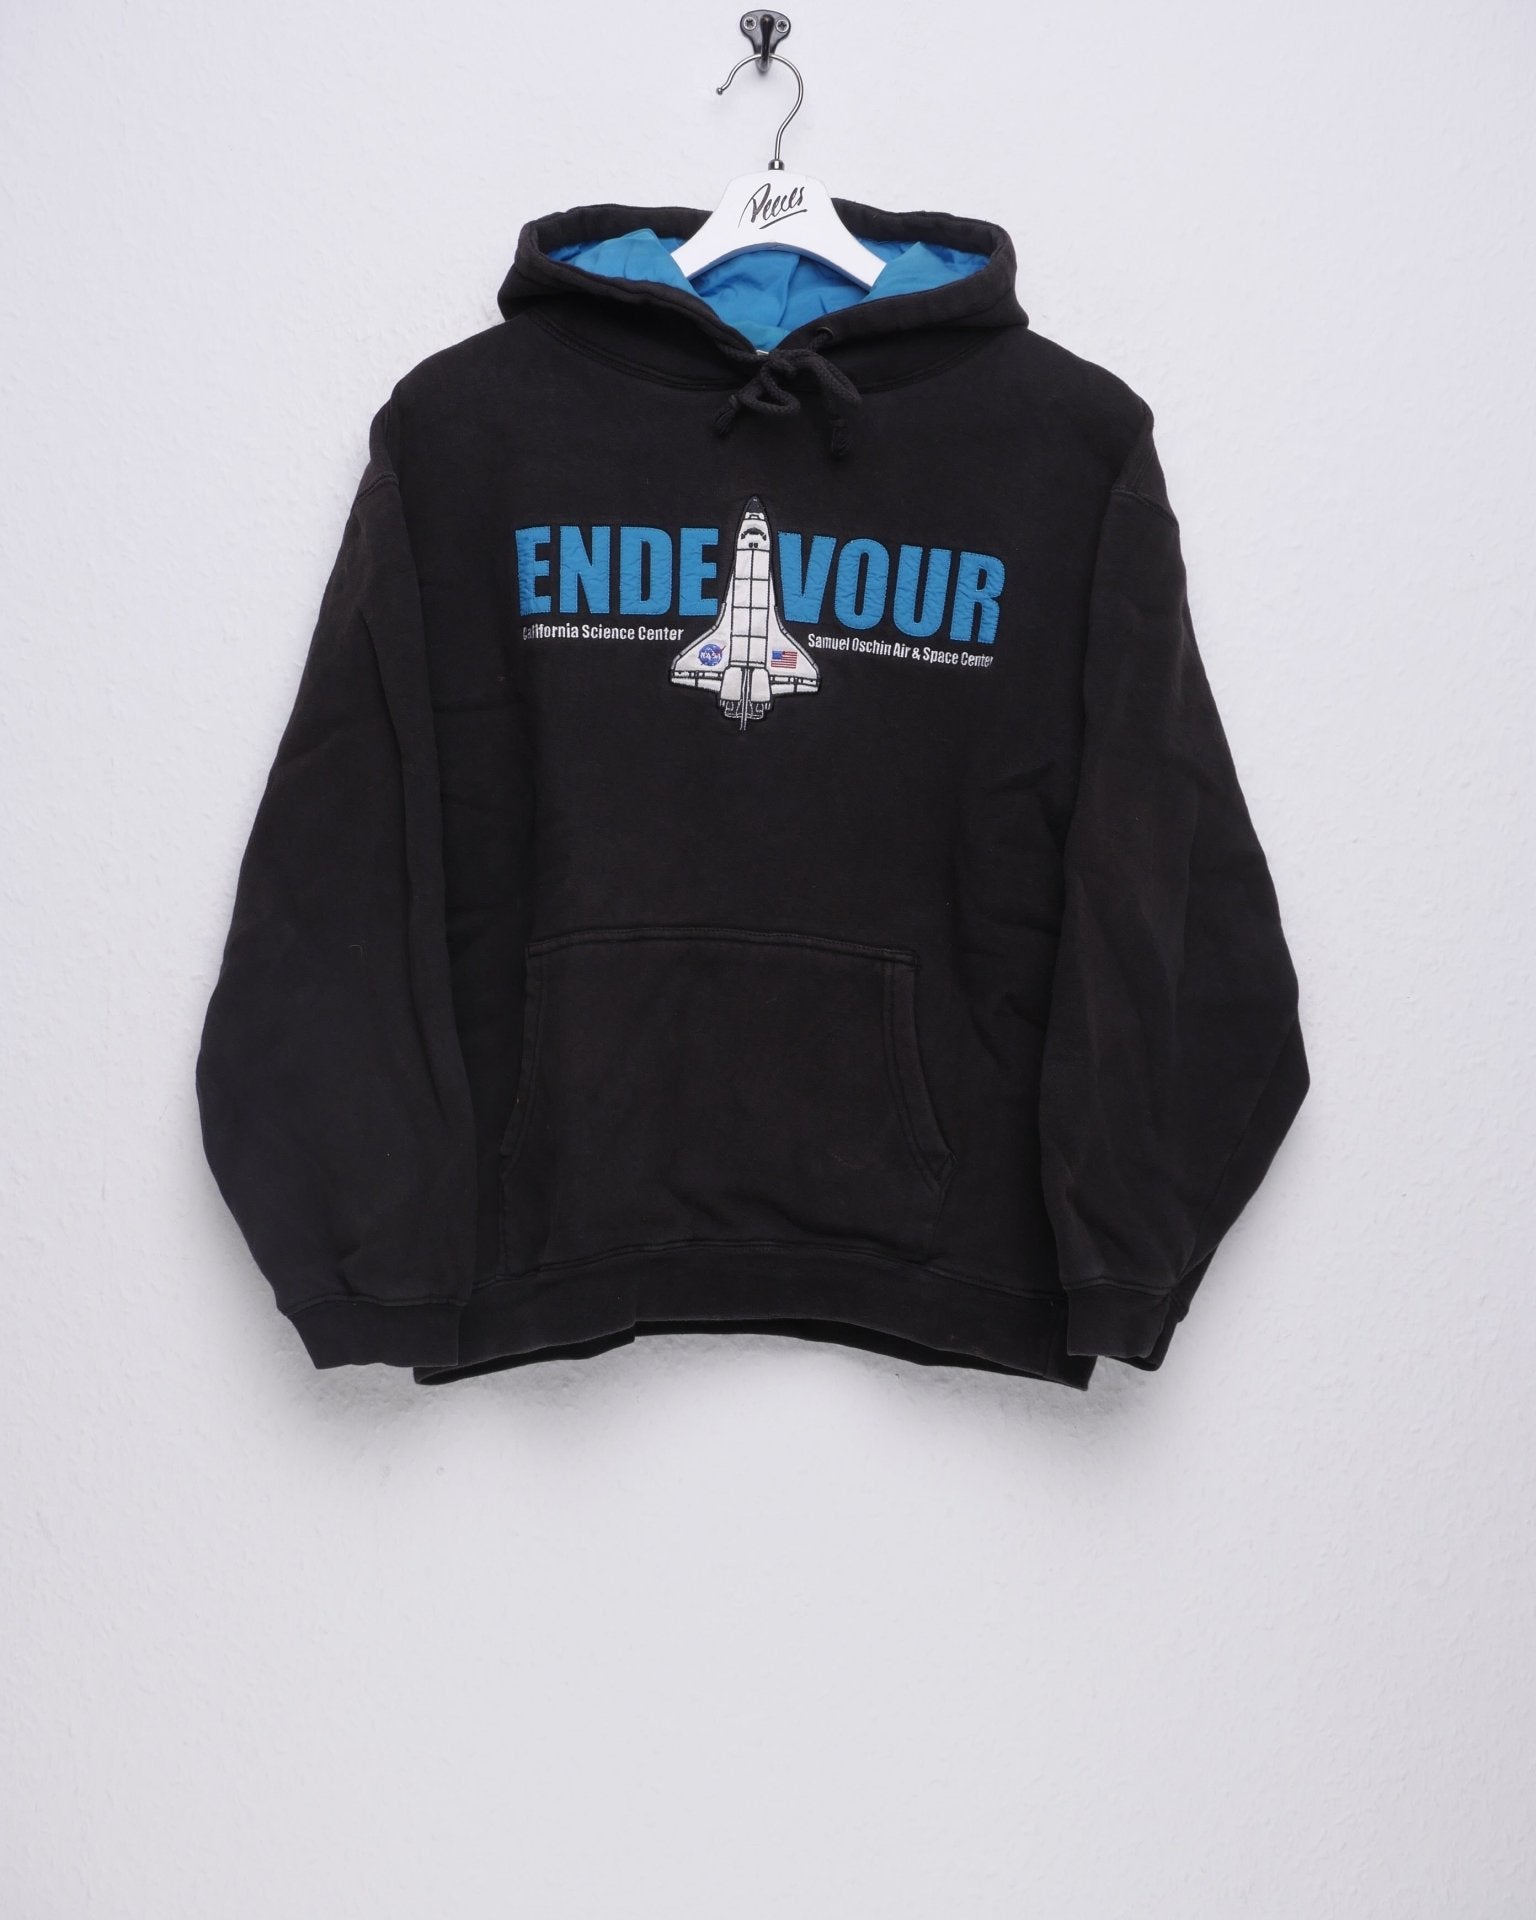 Endevour California Science Center embroidered Graphic black Hoodie - Peeces